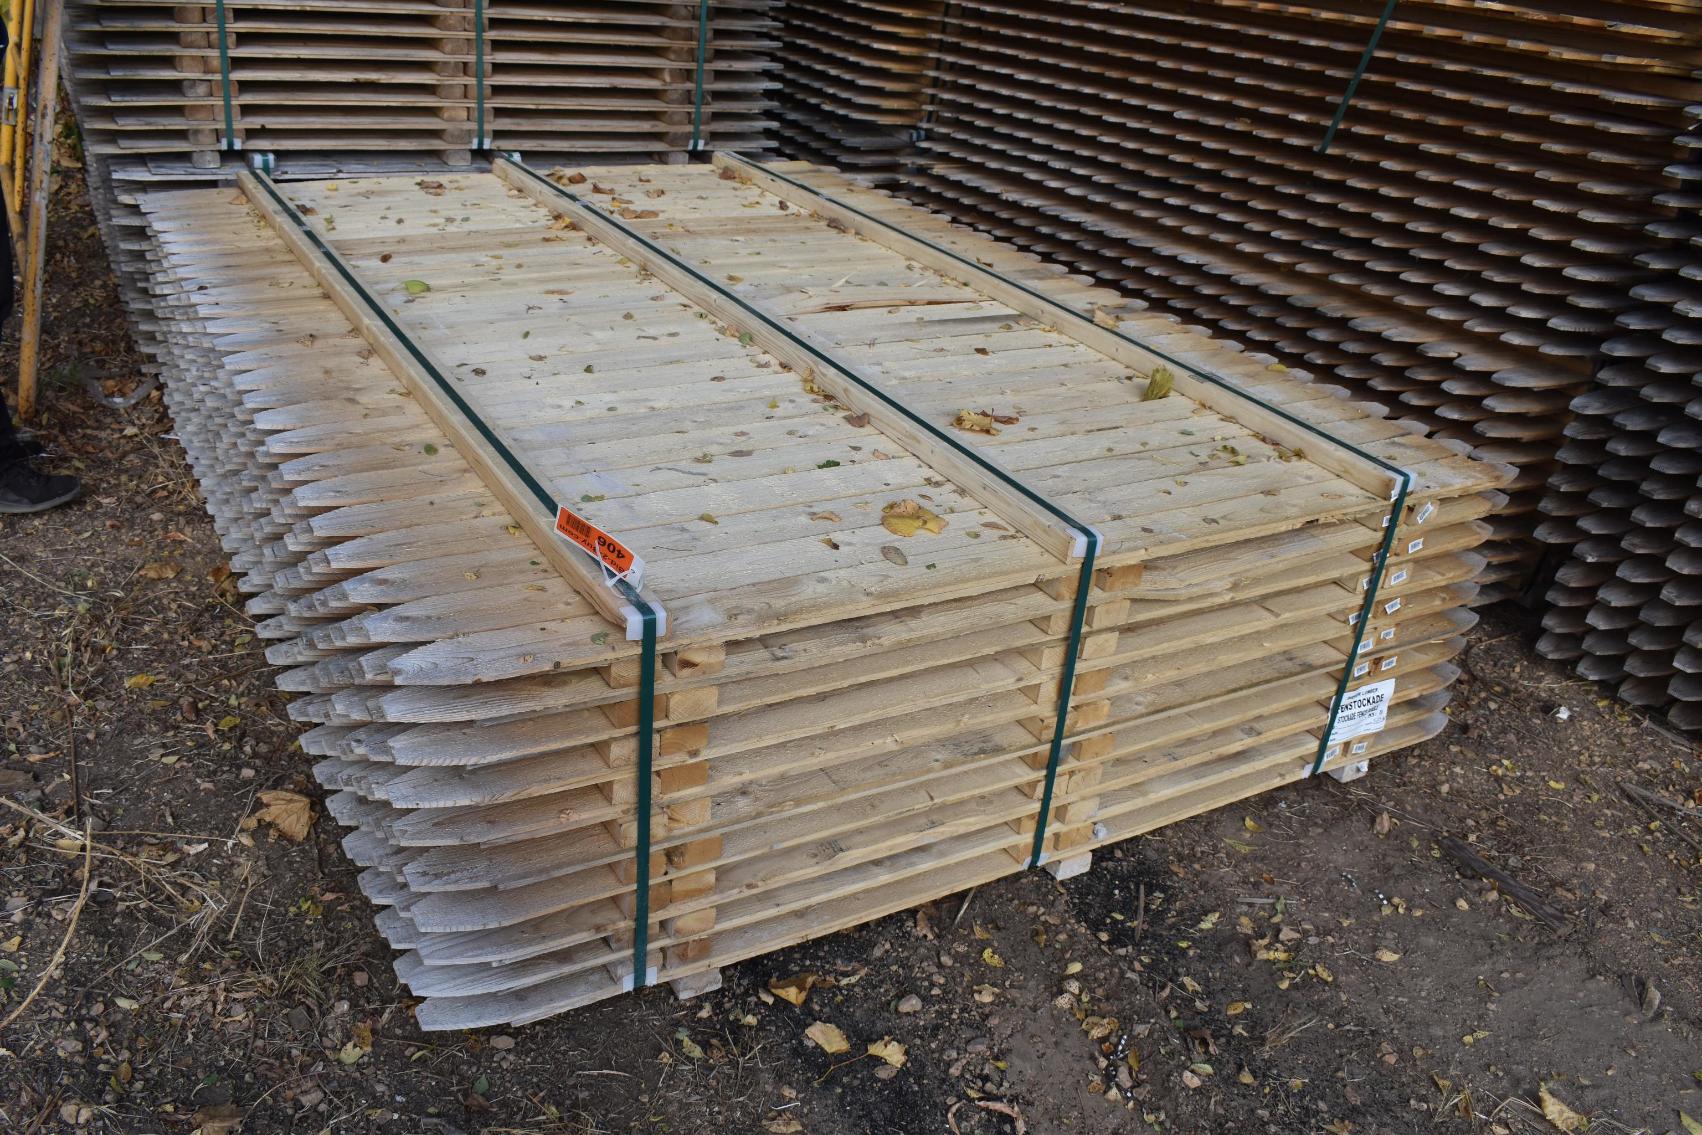 Lumber Yard Material: Trim, Fencing, Tongue and Groove, Lumber, Roof Vents, Doors